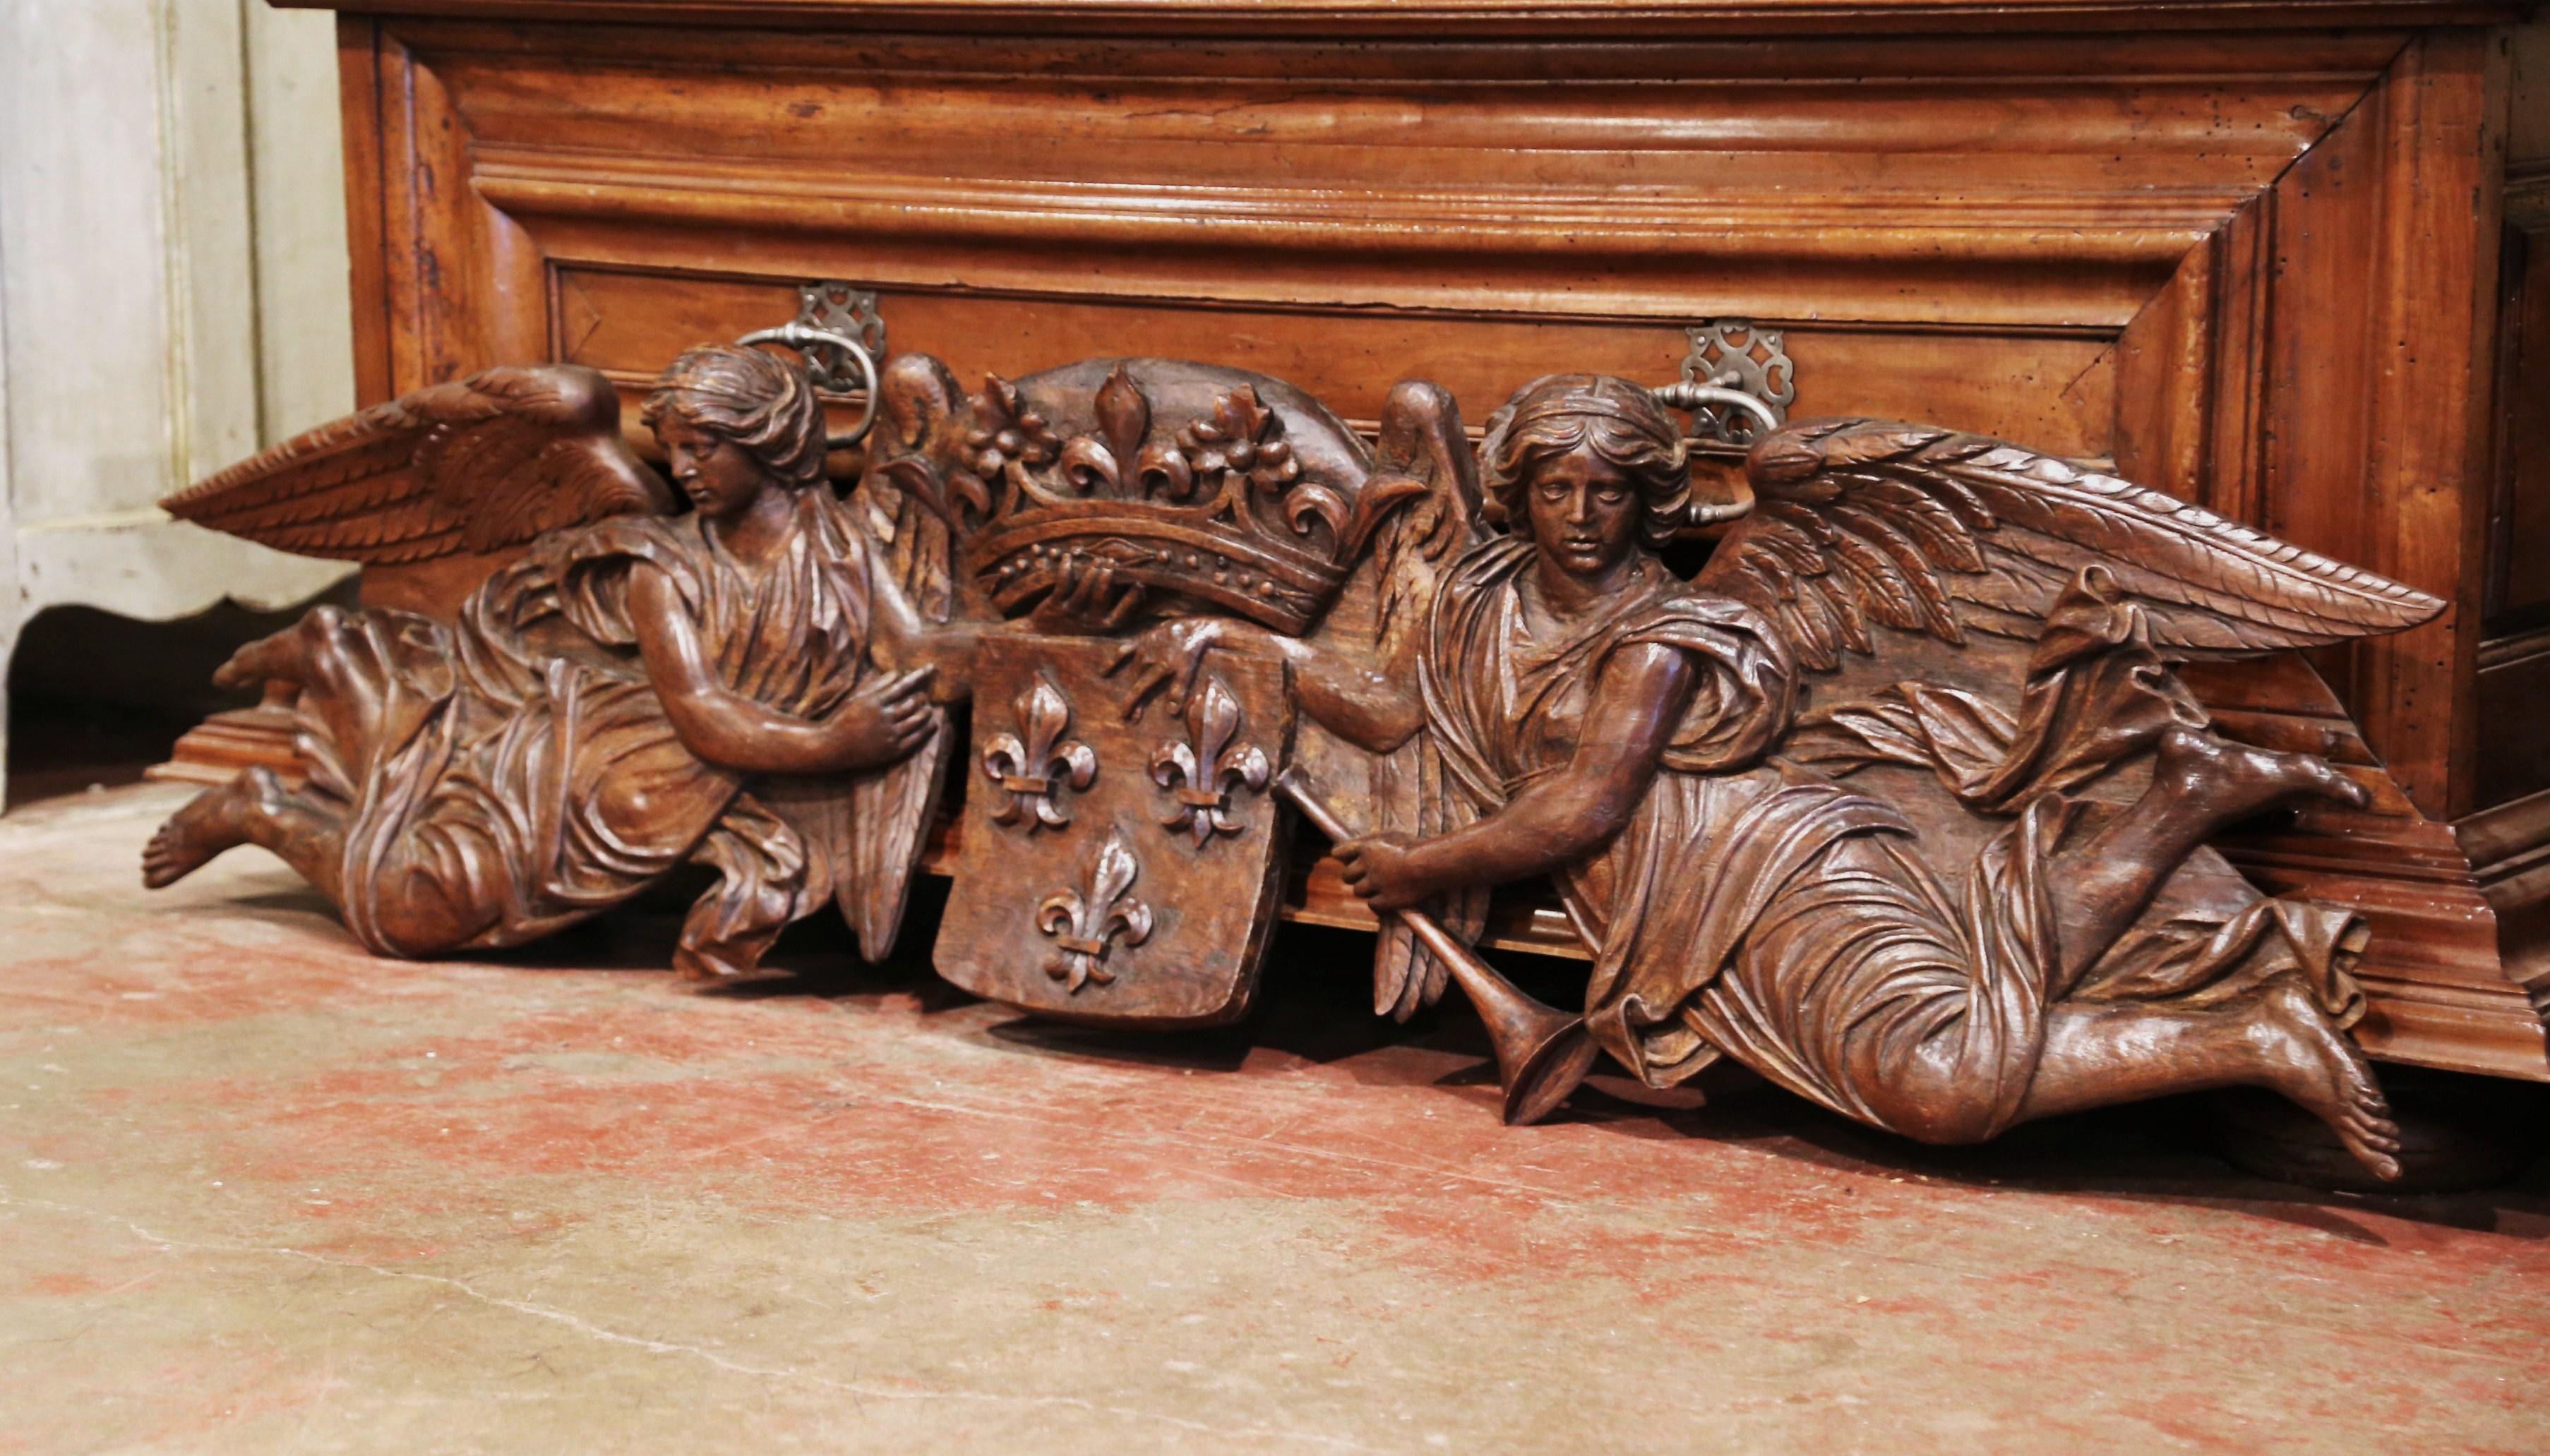 Decorate a man's study or an over door with this important antique carving. Crafted in France circa 1650 and made of oakwood, the six foot carved piece features two winged angels with trumpet holding a crest representing Louis XIV coat of arms